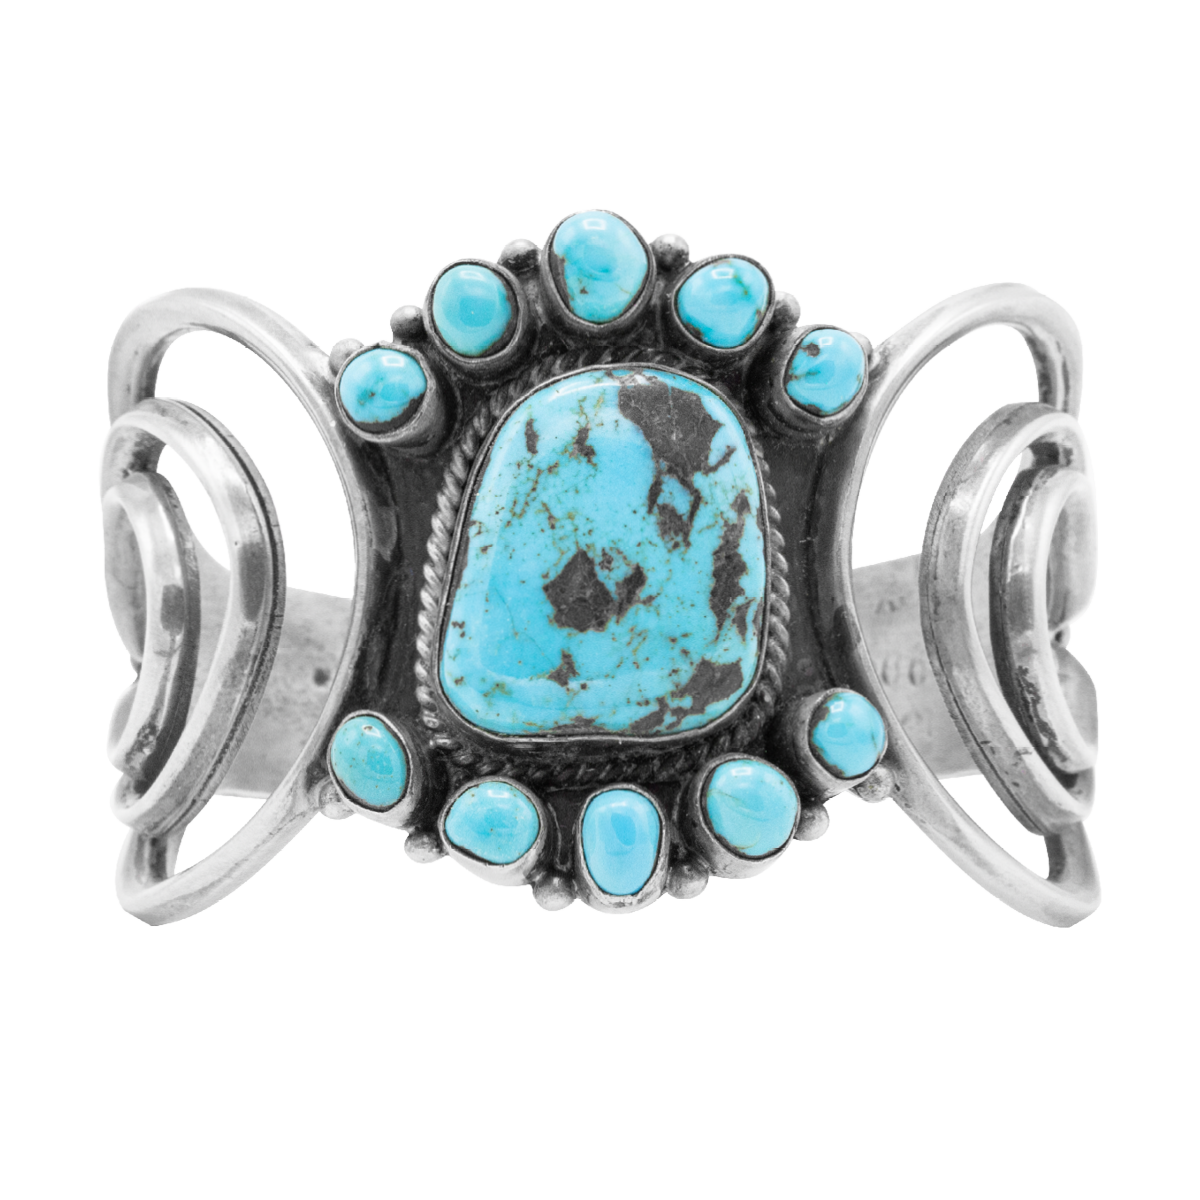 SS and Turquoise Cuff Bracelet GZ NW 4090 - Gertrude Zachary